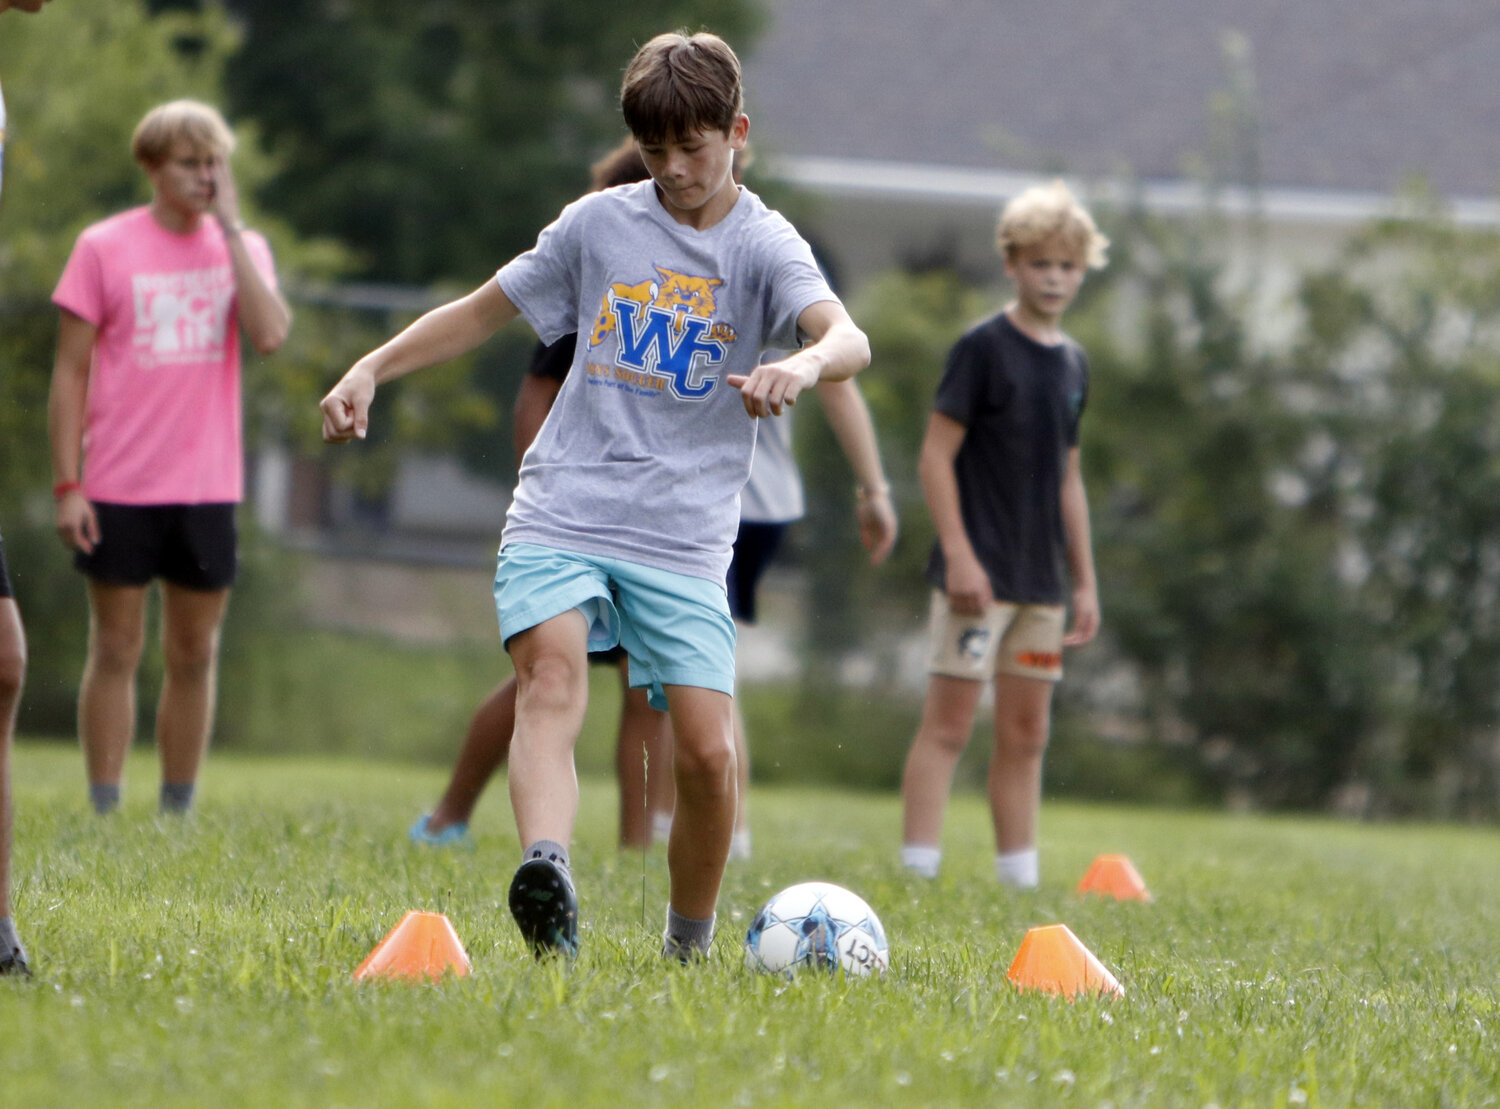 Thomas Wilgus dribbles the ball during a drill at practice earlier this month.